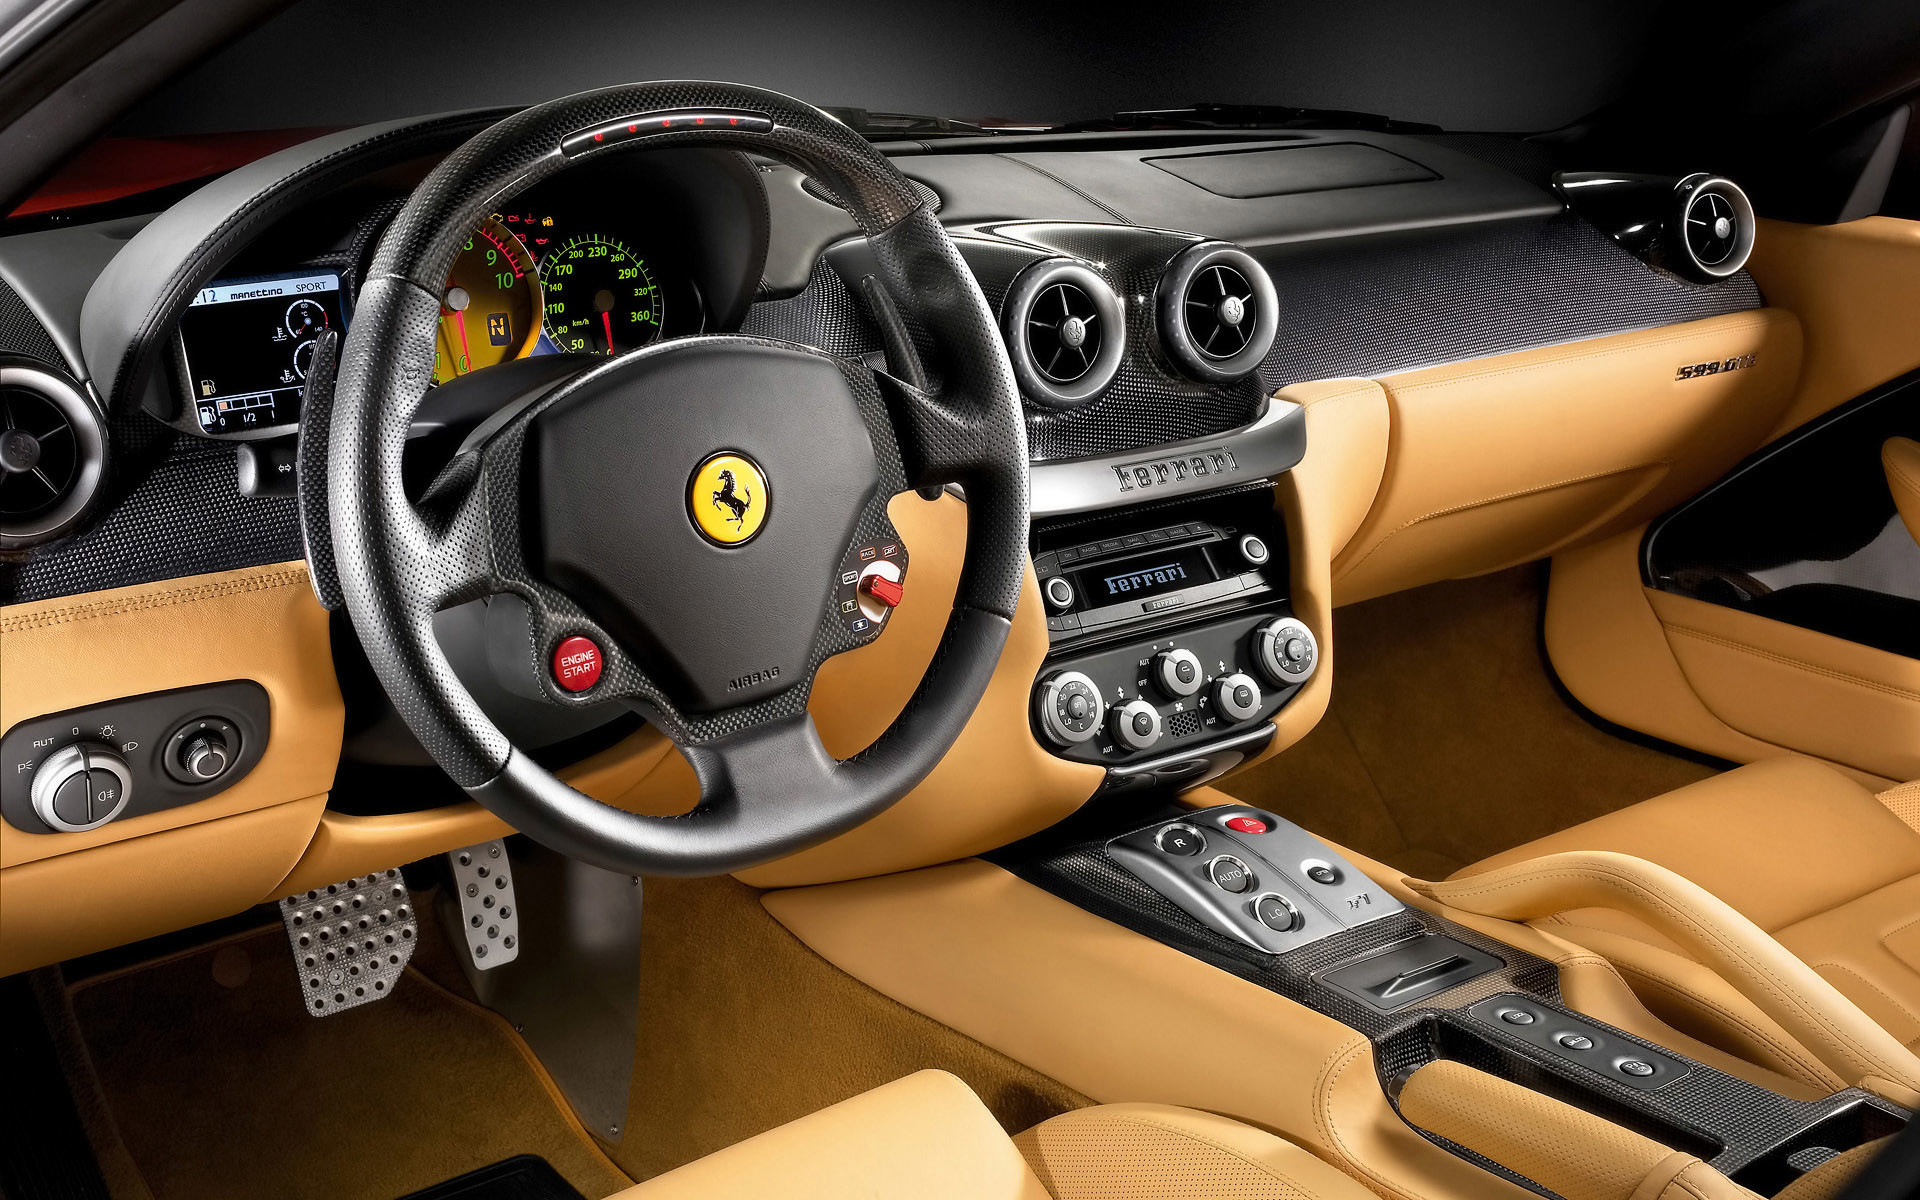 1920x1200 You are viewing HD ferrari cockpit wallpapers.